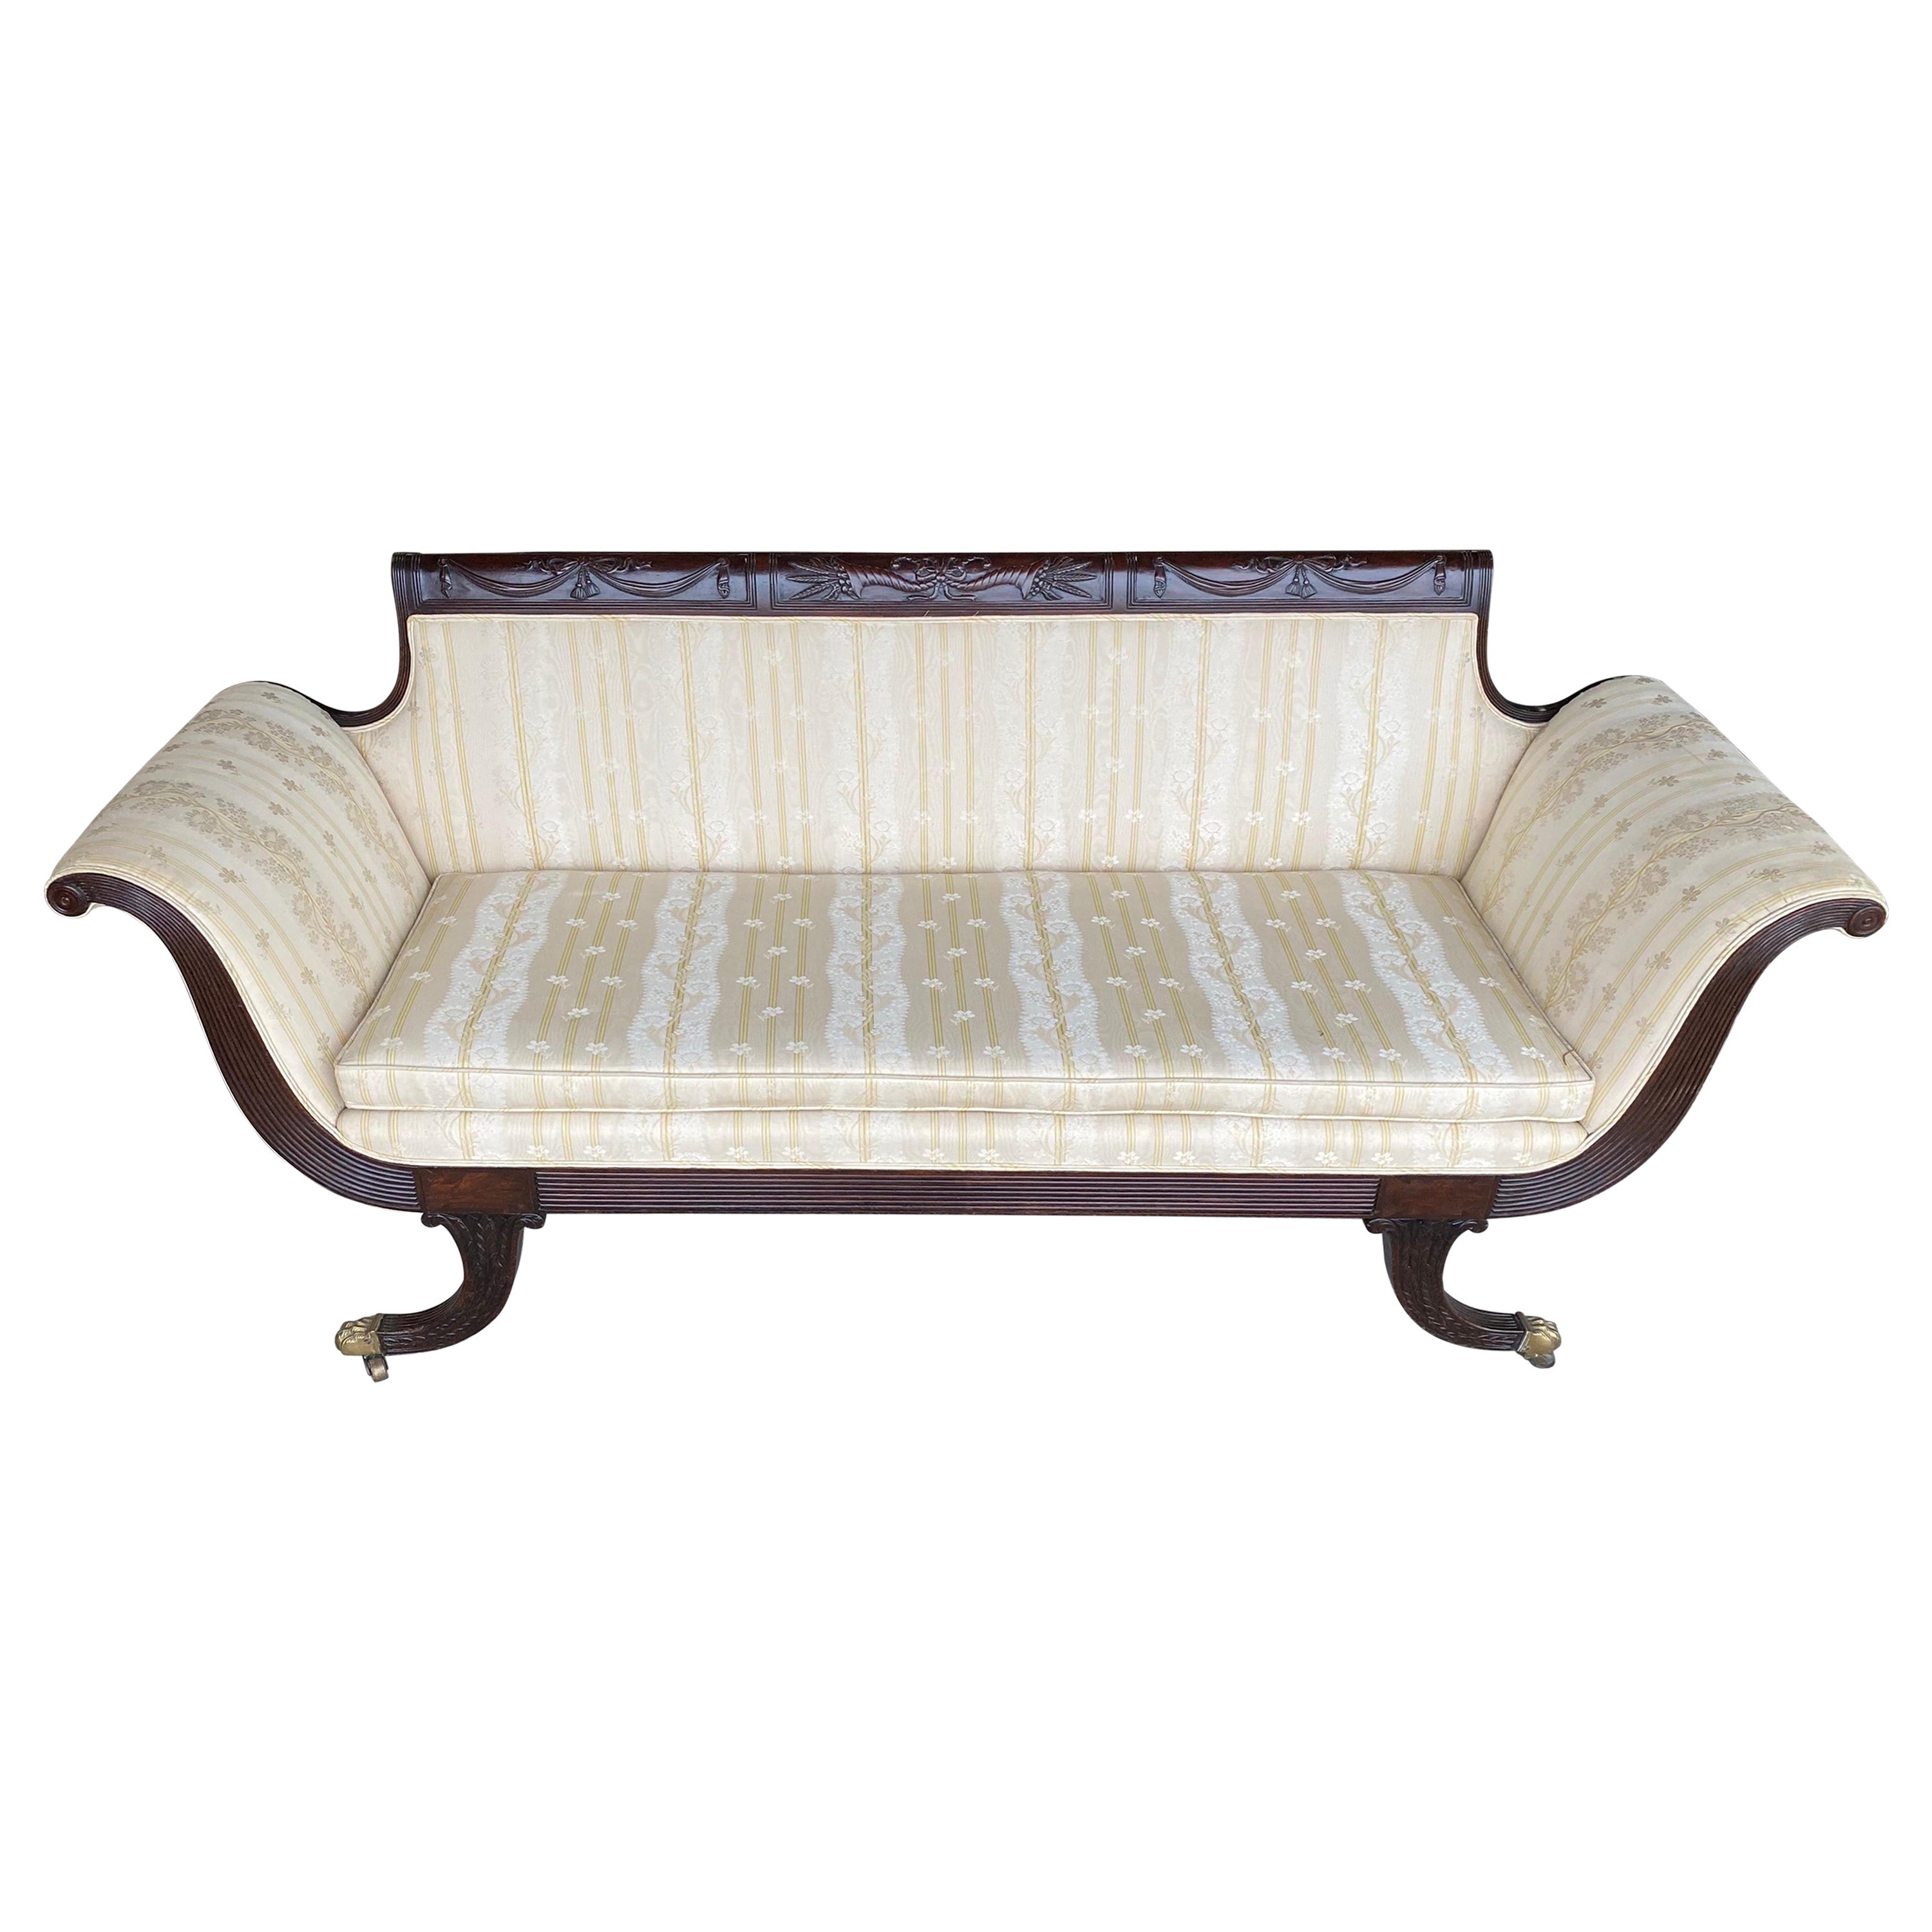 Early 19th Century New York Sofa, Probably by Duncan Phyfe For Sale